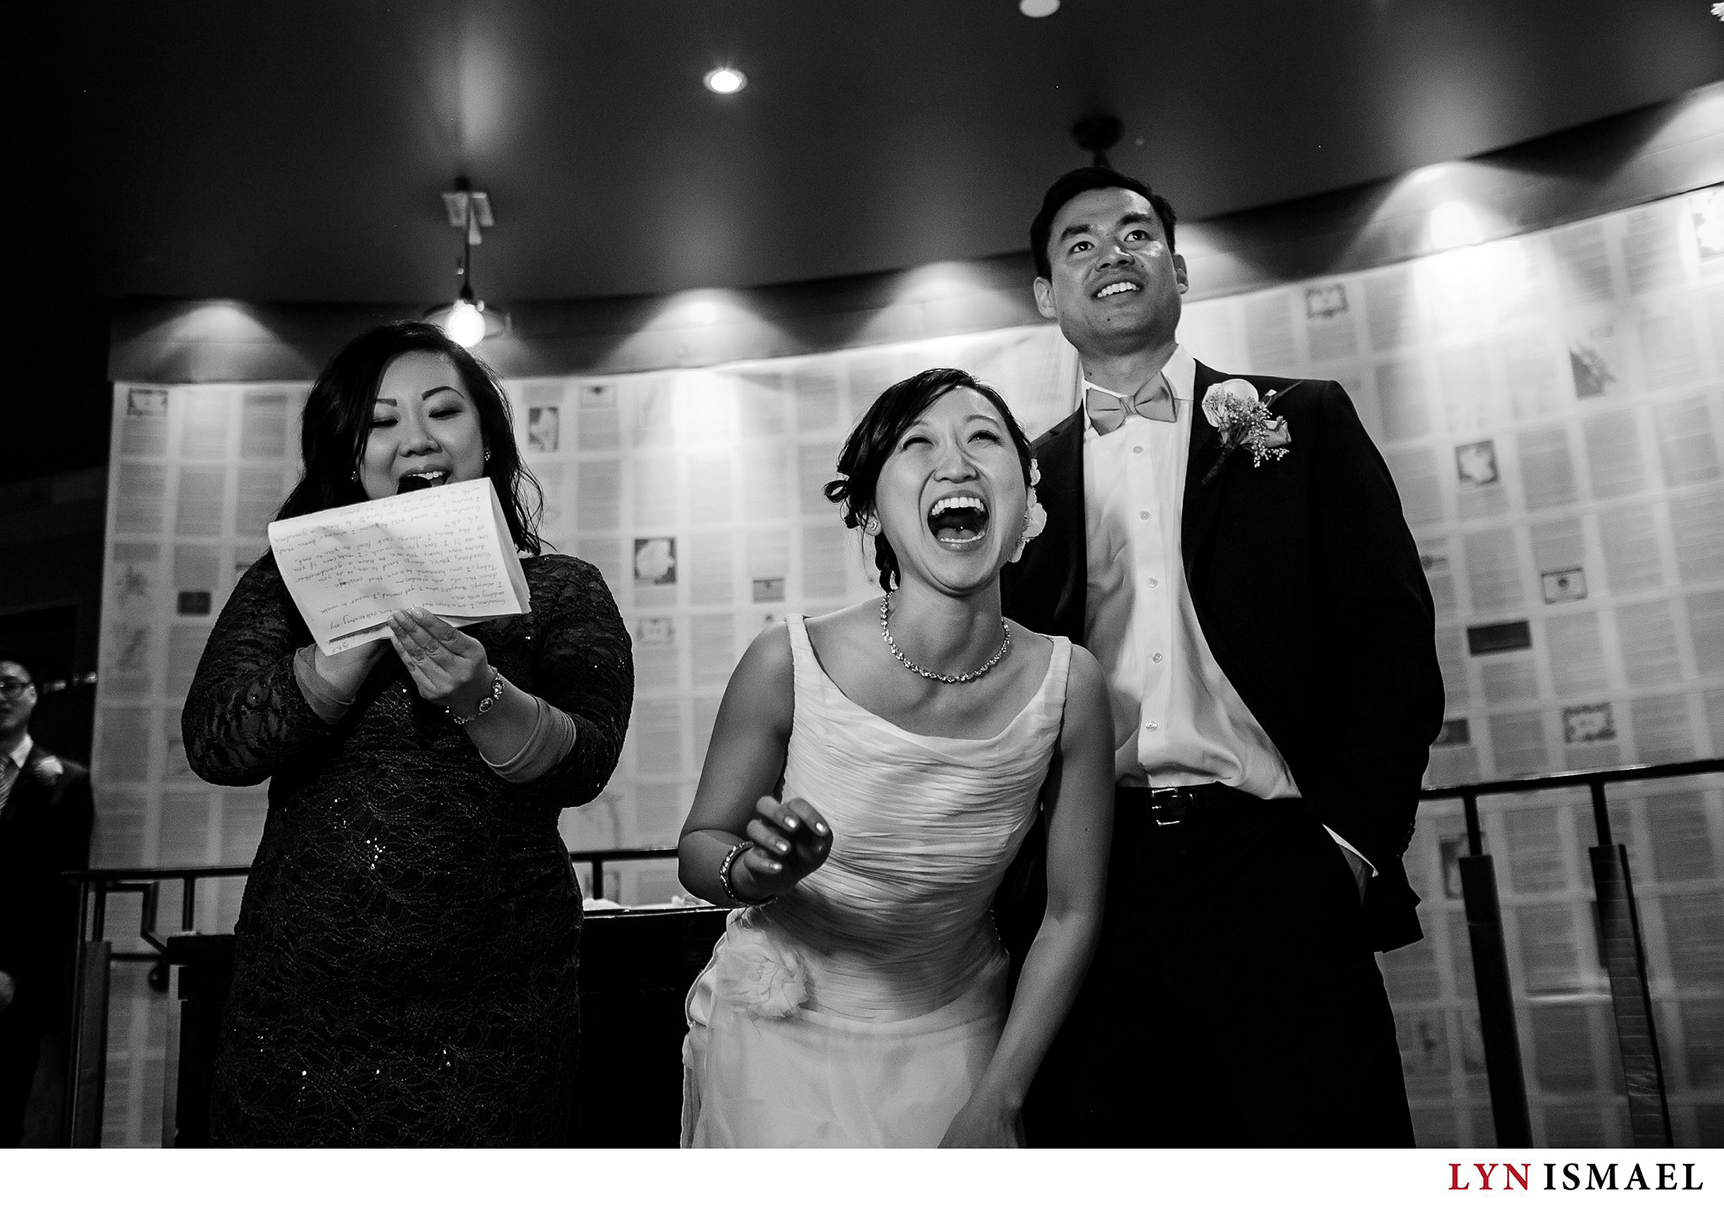 Toronto bride laughs at one of the jokes during her wedding reception at Reds Wine Tavern in Toronto.